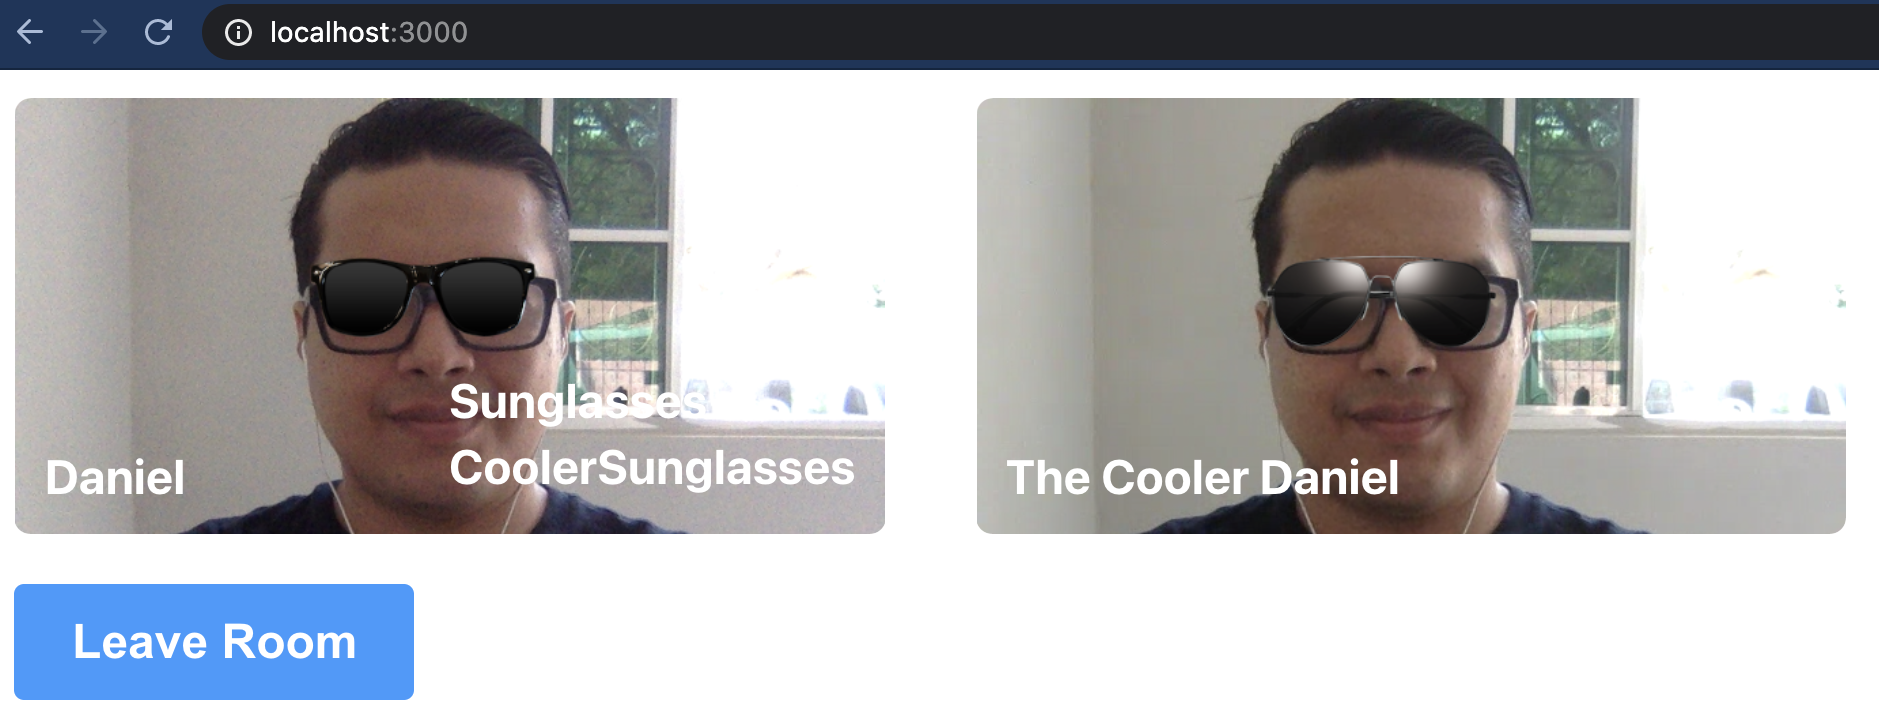 2 images of author with filters -- left labeled "Daniel" with plain sunglasses; right is "The Cooler Daniel" with aviators.